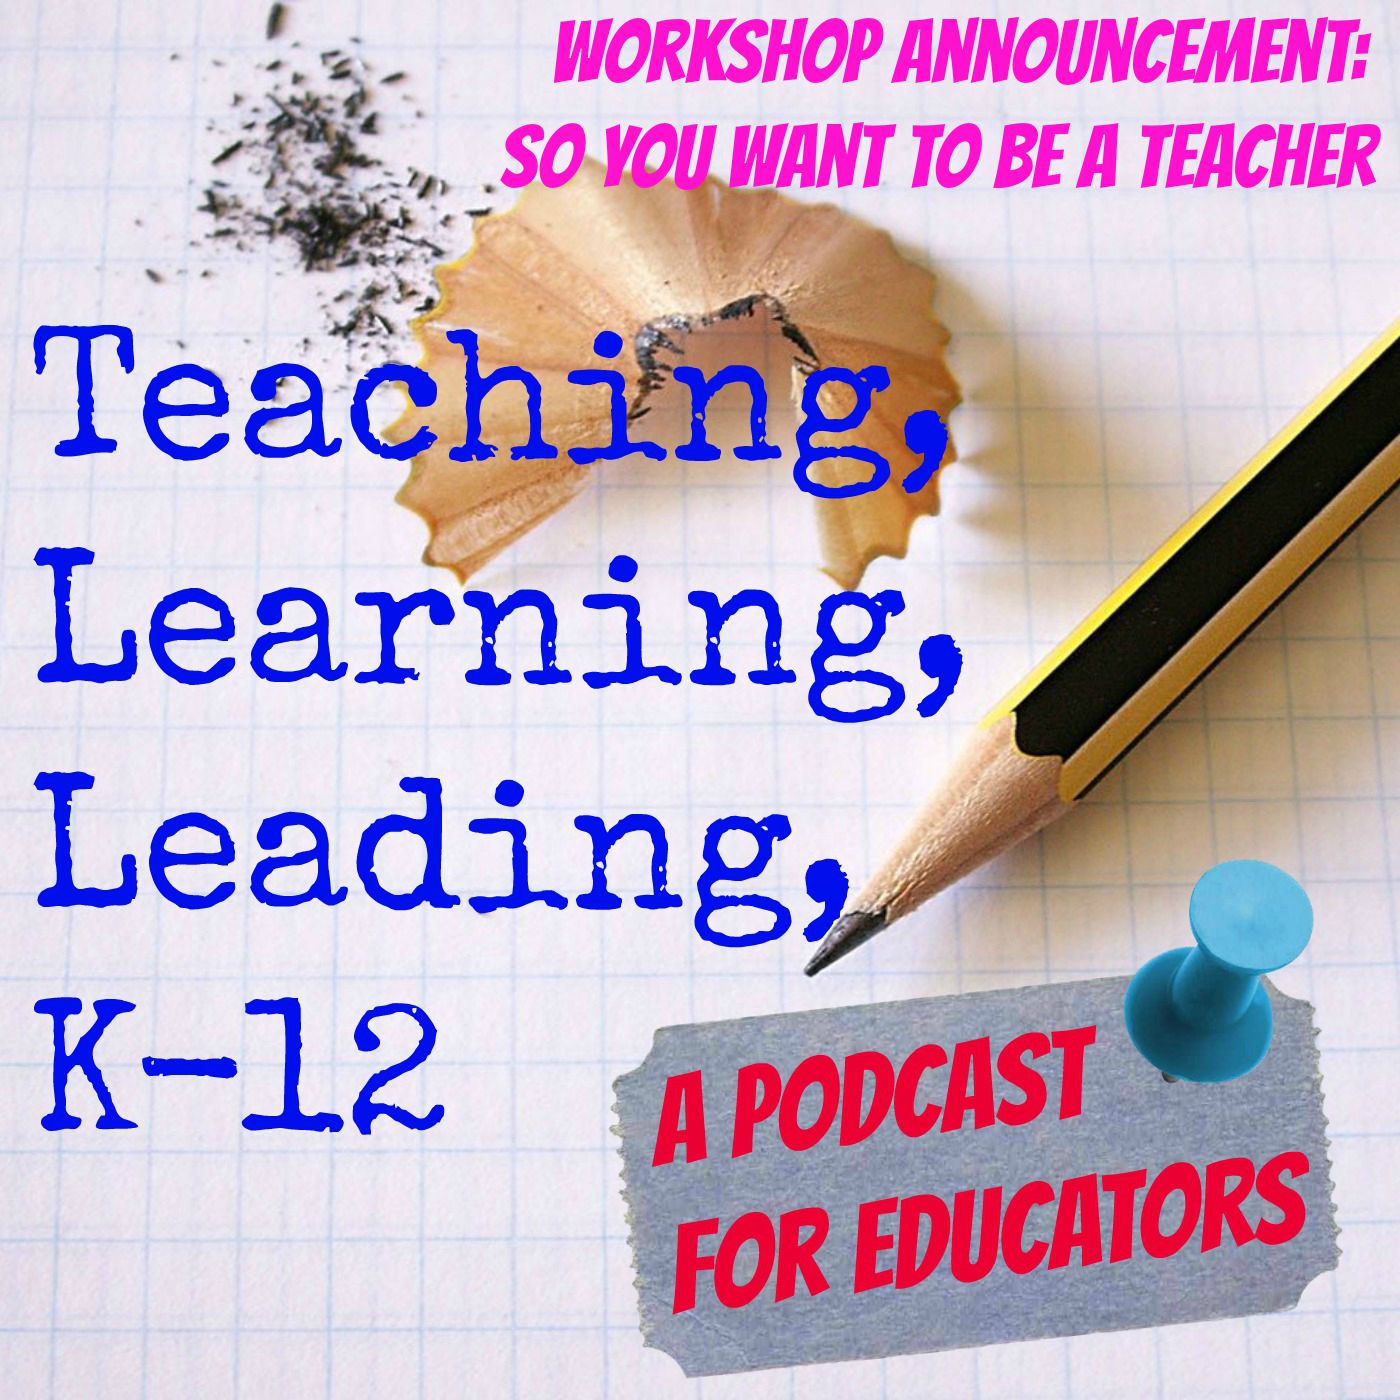 Episode 67: Workshop Annoucement- So You Want to be a Teacher